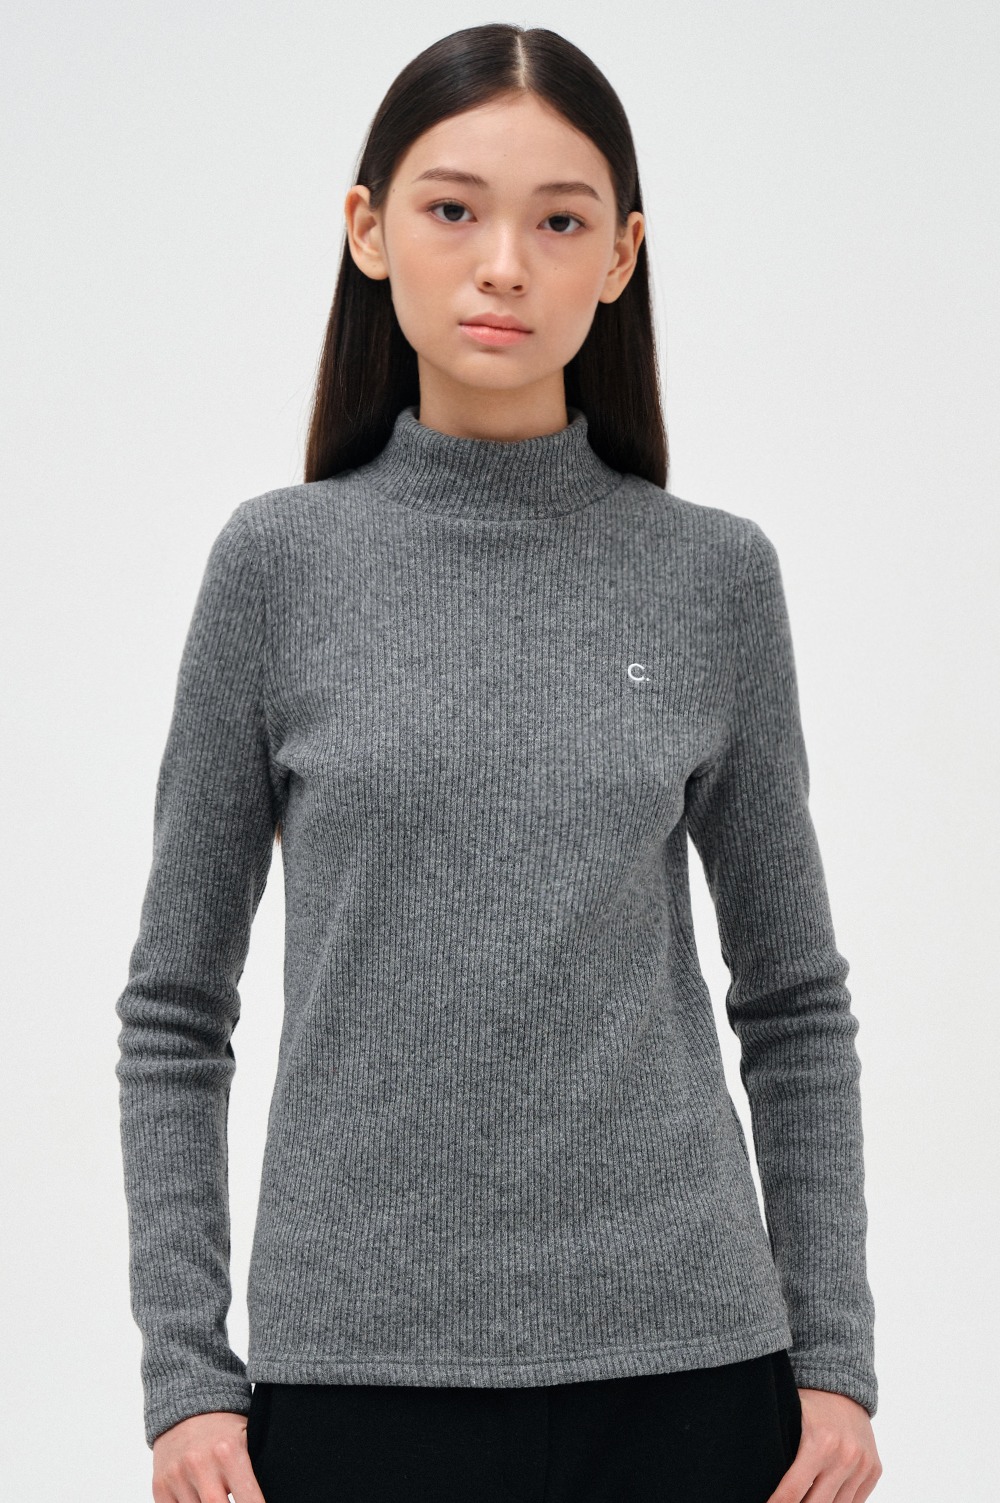 clove - [23FW clove] Ribbed Turtleneck (Charcoal)